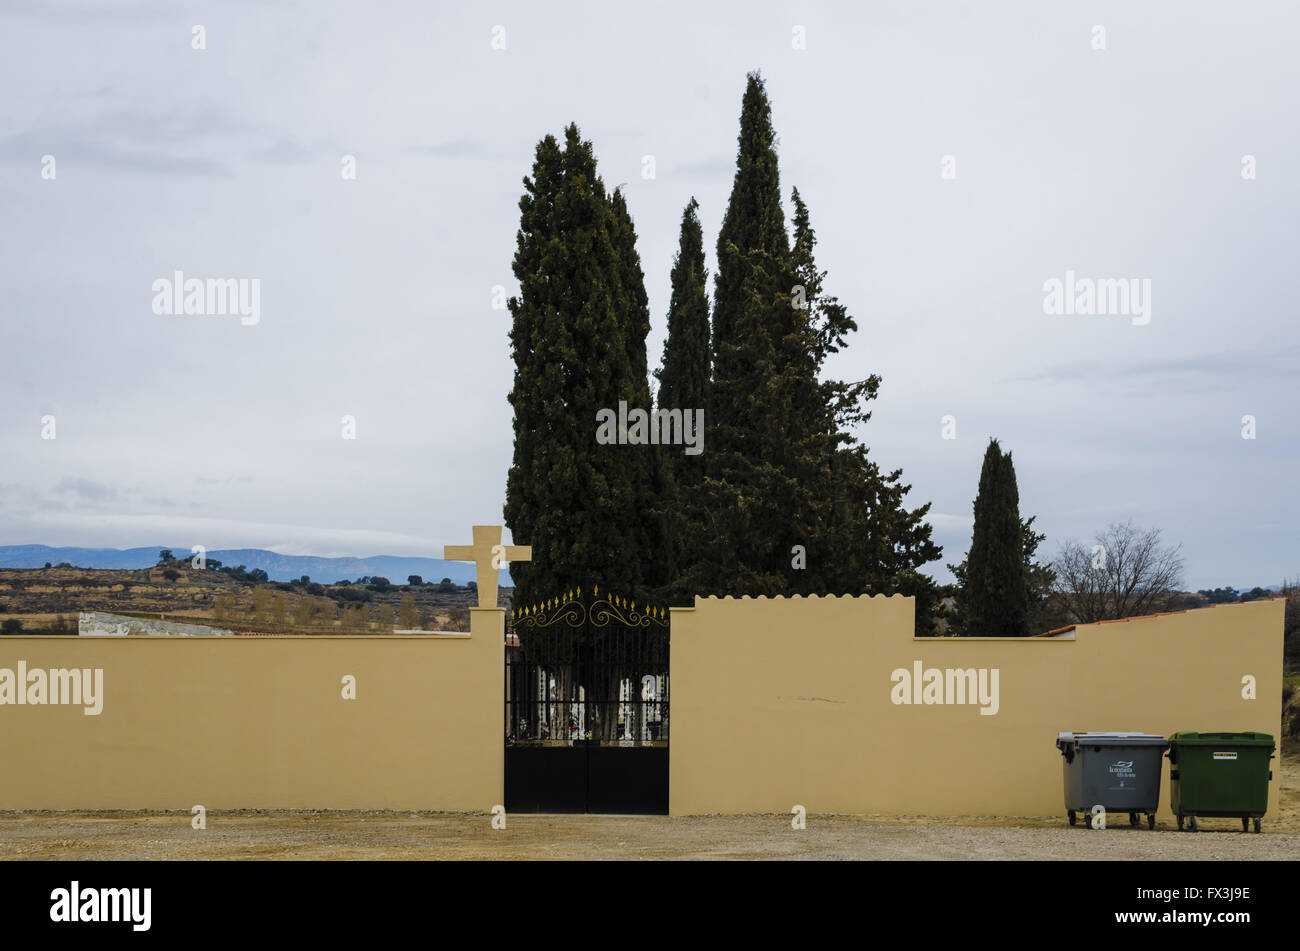 A front cemetery view in Sentiu de Sió, Lleida province, Catalonia, Spain Stock Photo